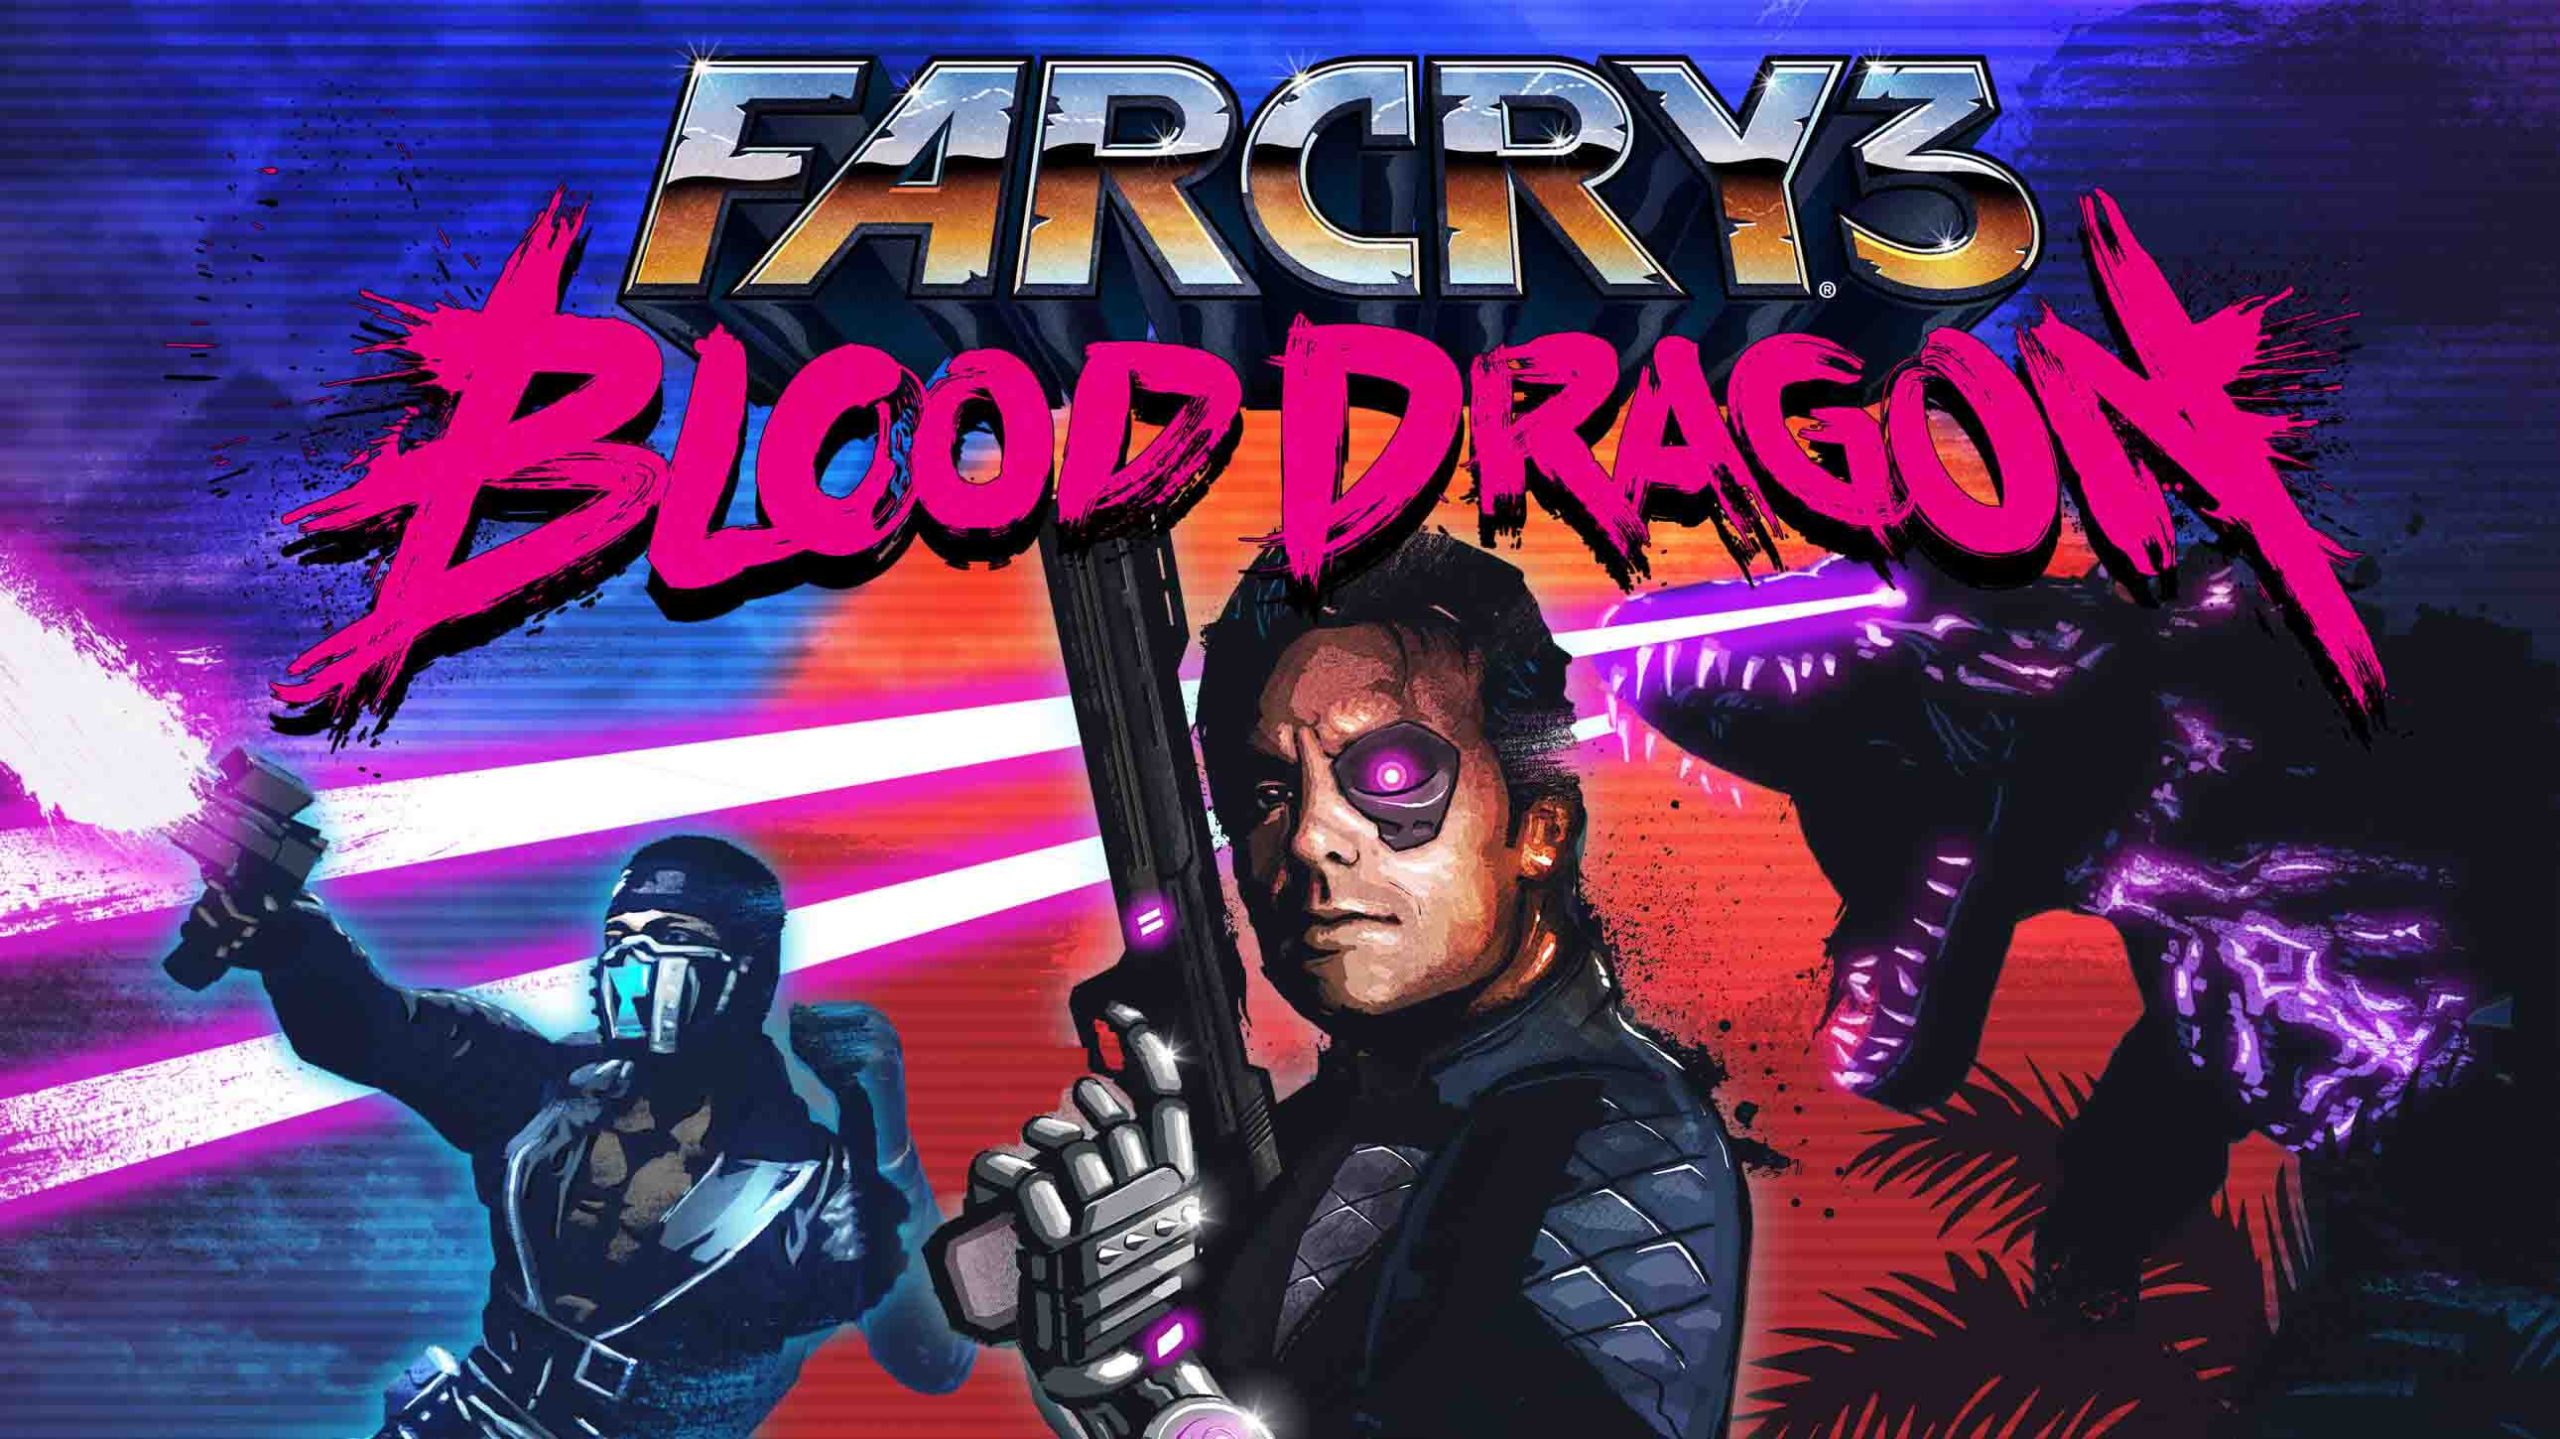 Far Cry 3: Blood Dragon System Requirements for PC Games minimum, recommended specifications for Windows, CPU, OS, Processor, RAM Memory, Storage, and GPU.